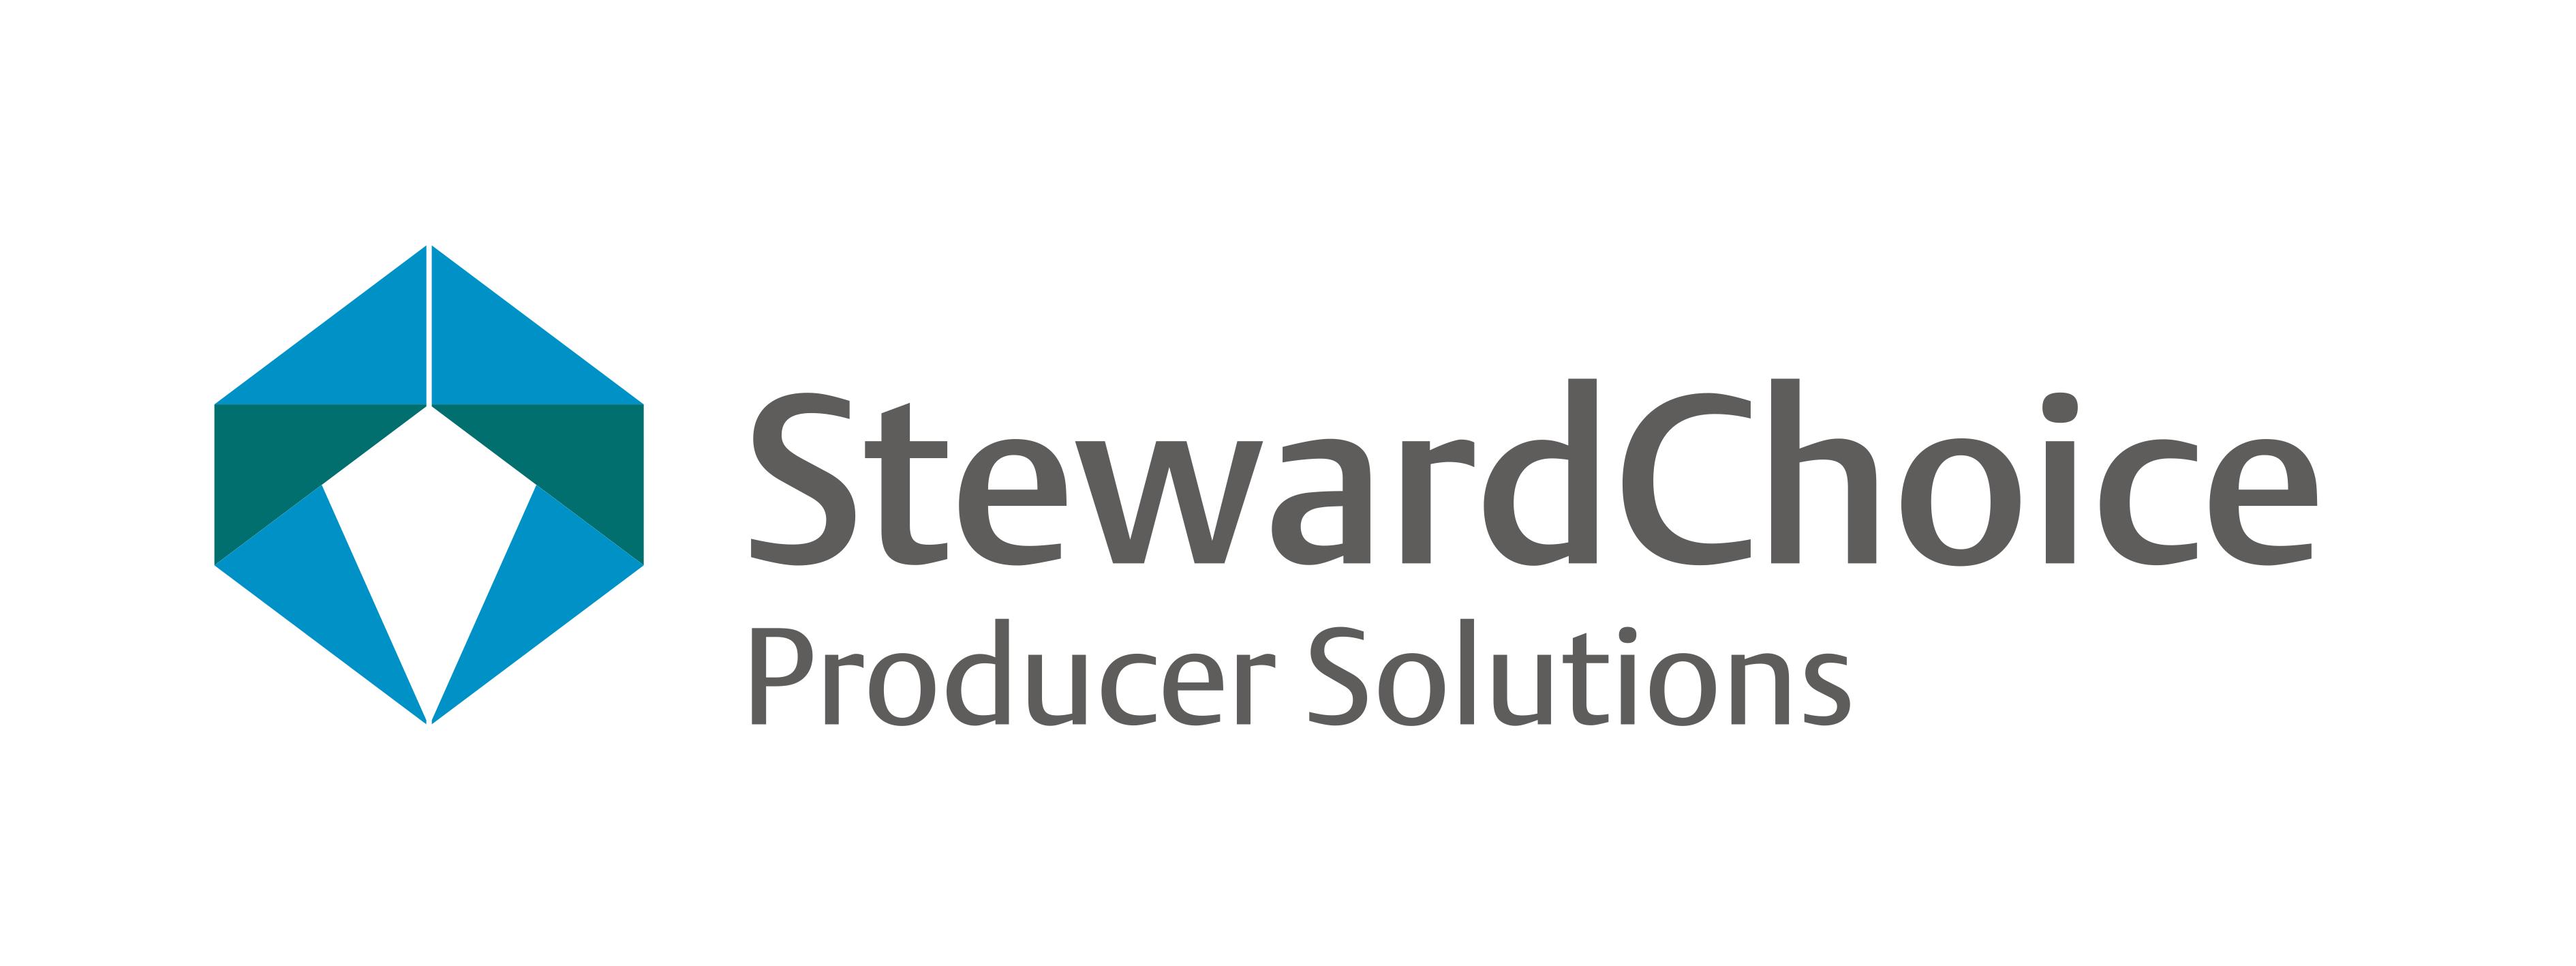 StewardChoice Posts v3.0 Packaging and Printed Paper Stewardship Plan  Image.